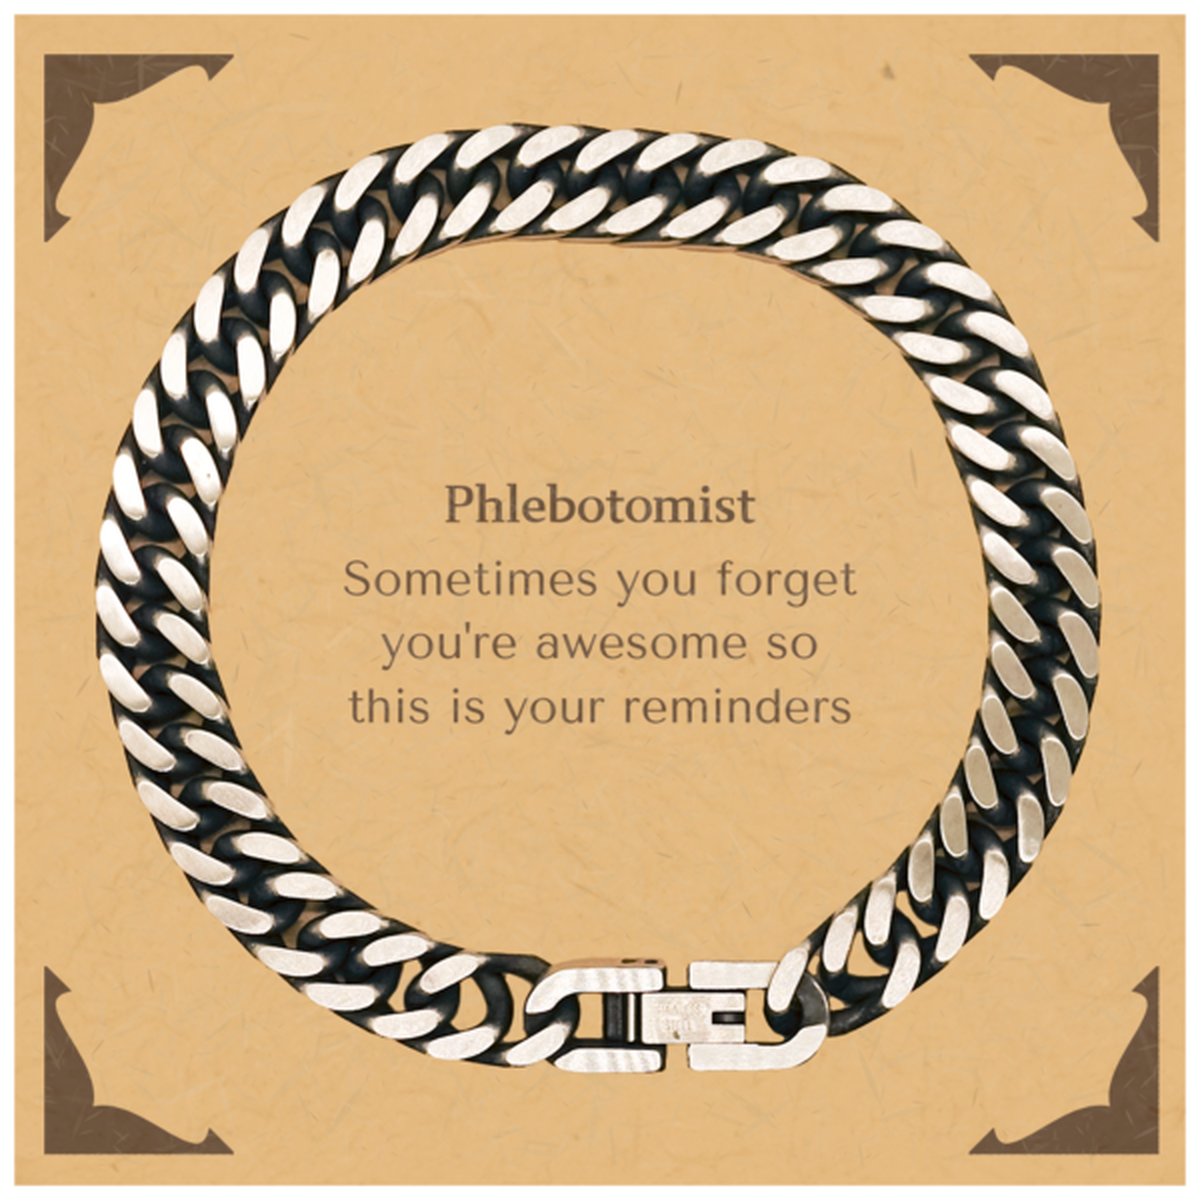 Sentimental Phlebotomist Cuban Link Chain Bracelet, Phlebotomist Sometimes you forget you're awesome so this is your reminders, Graduation Christmas Birthday Gifts for Phlebotomist, Men, Women, Coworkers